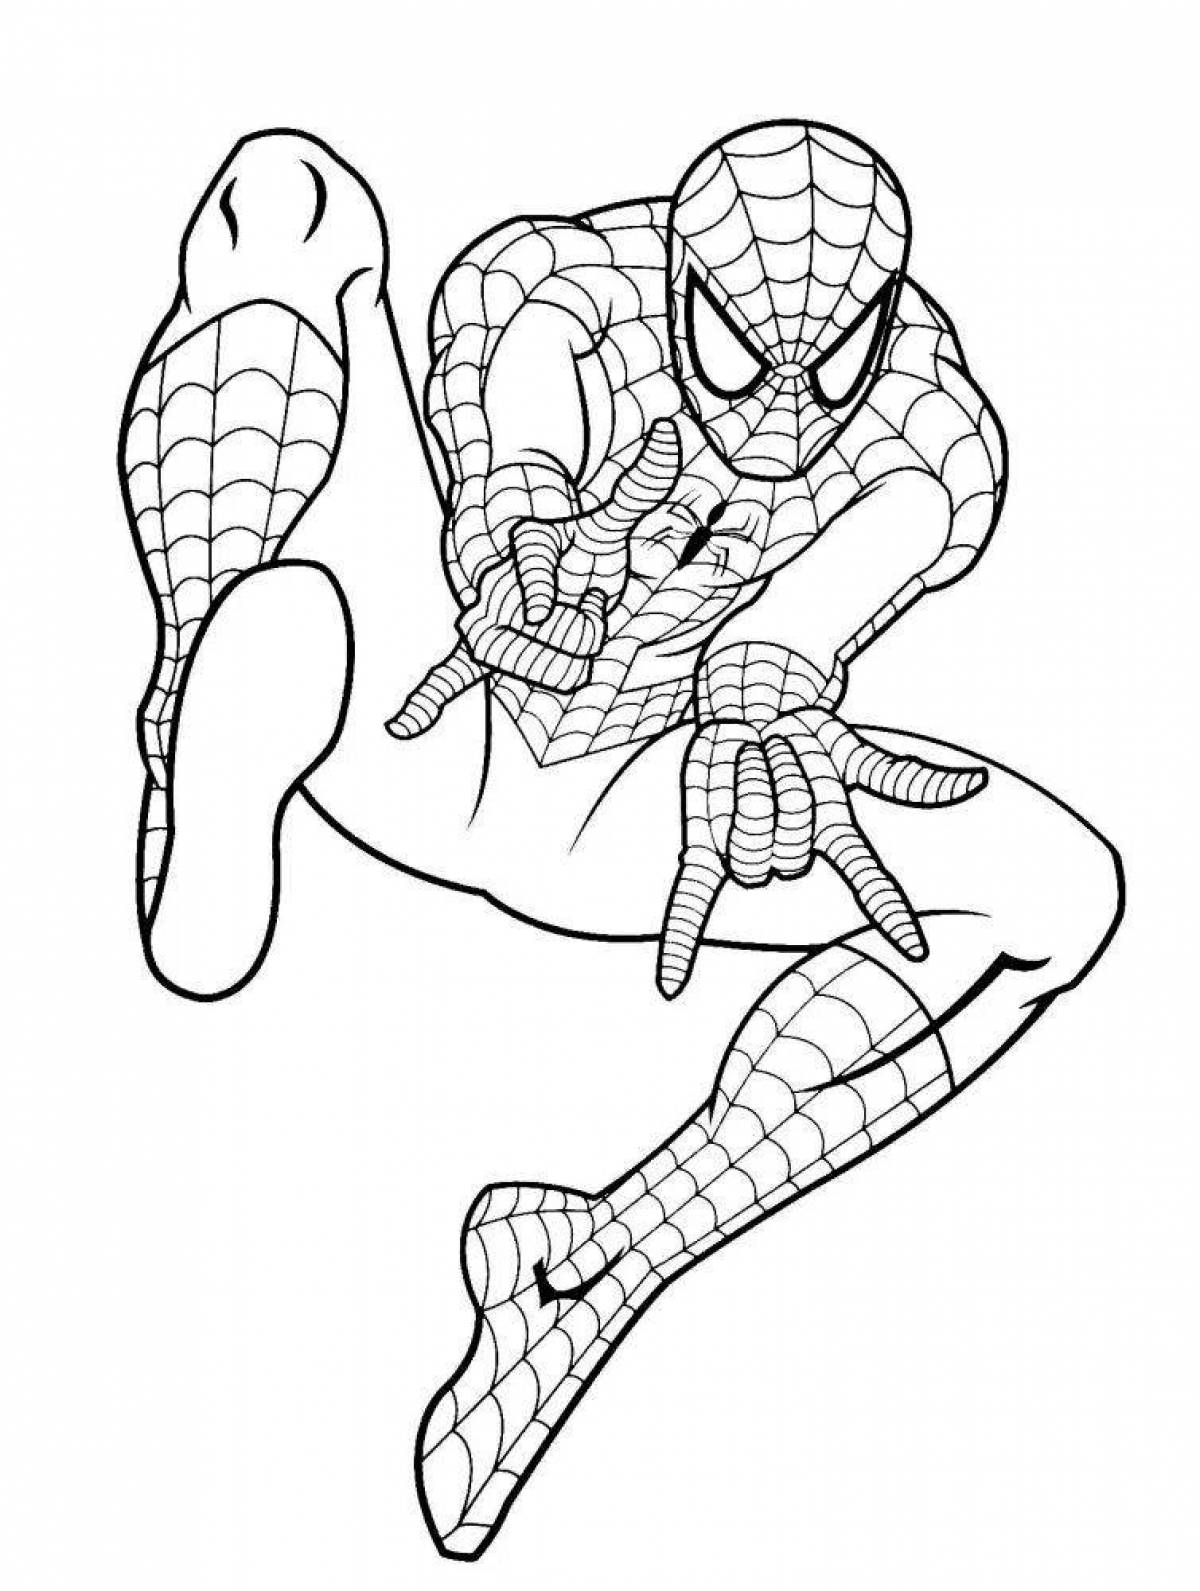 Spider-man coloring page